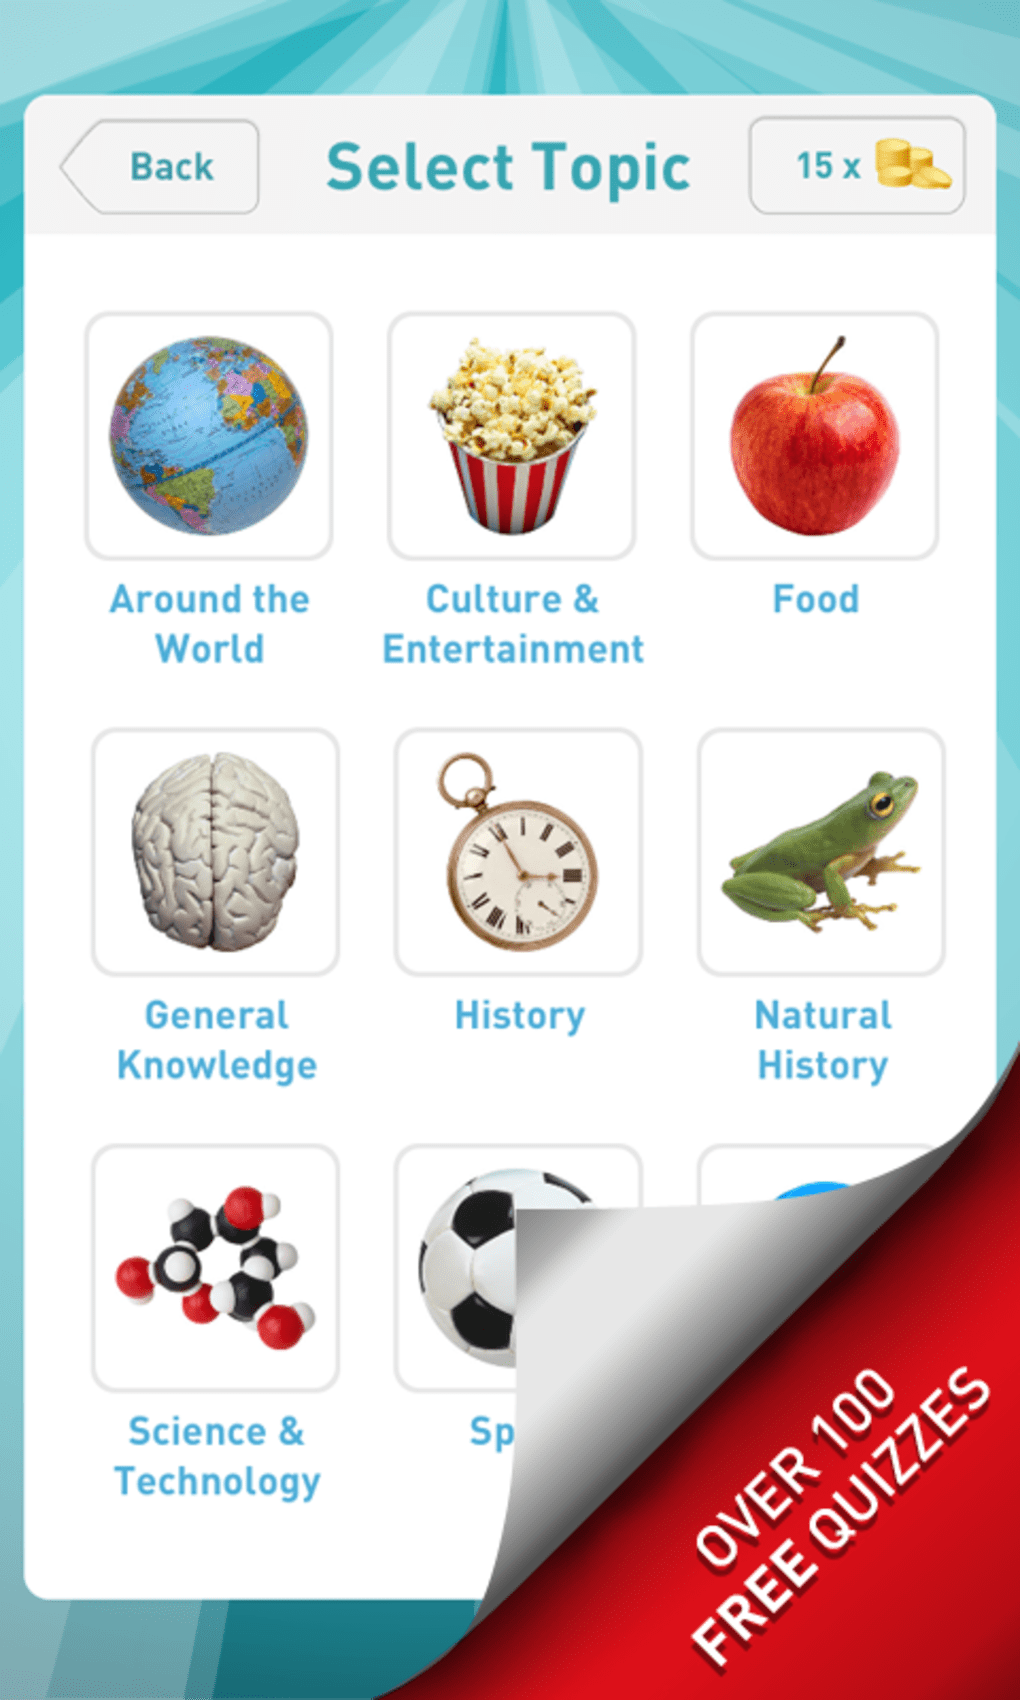 DK Quiz APK for Android - Download